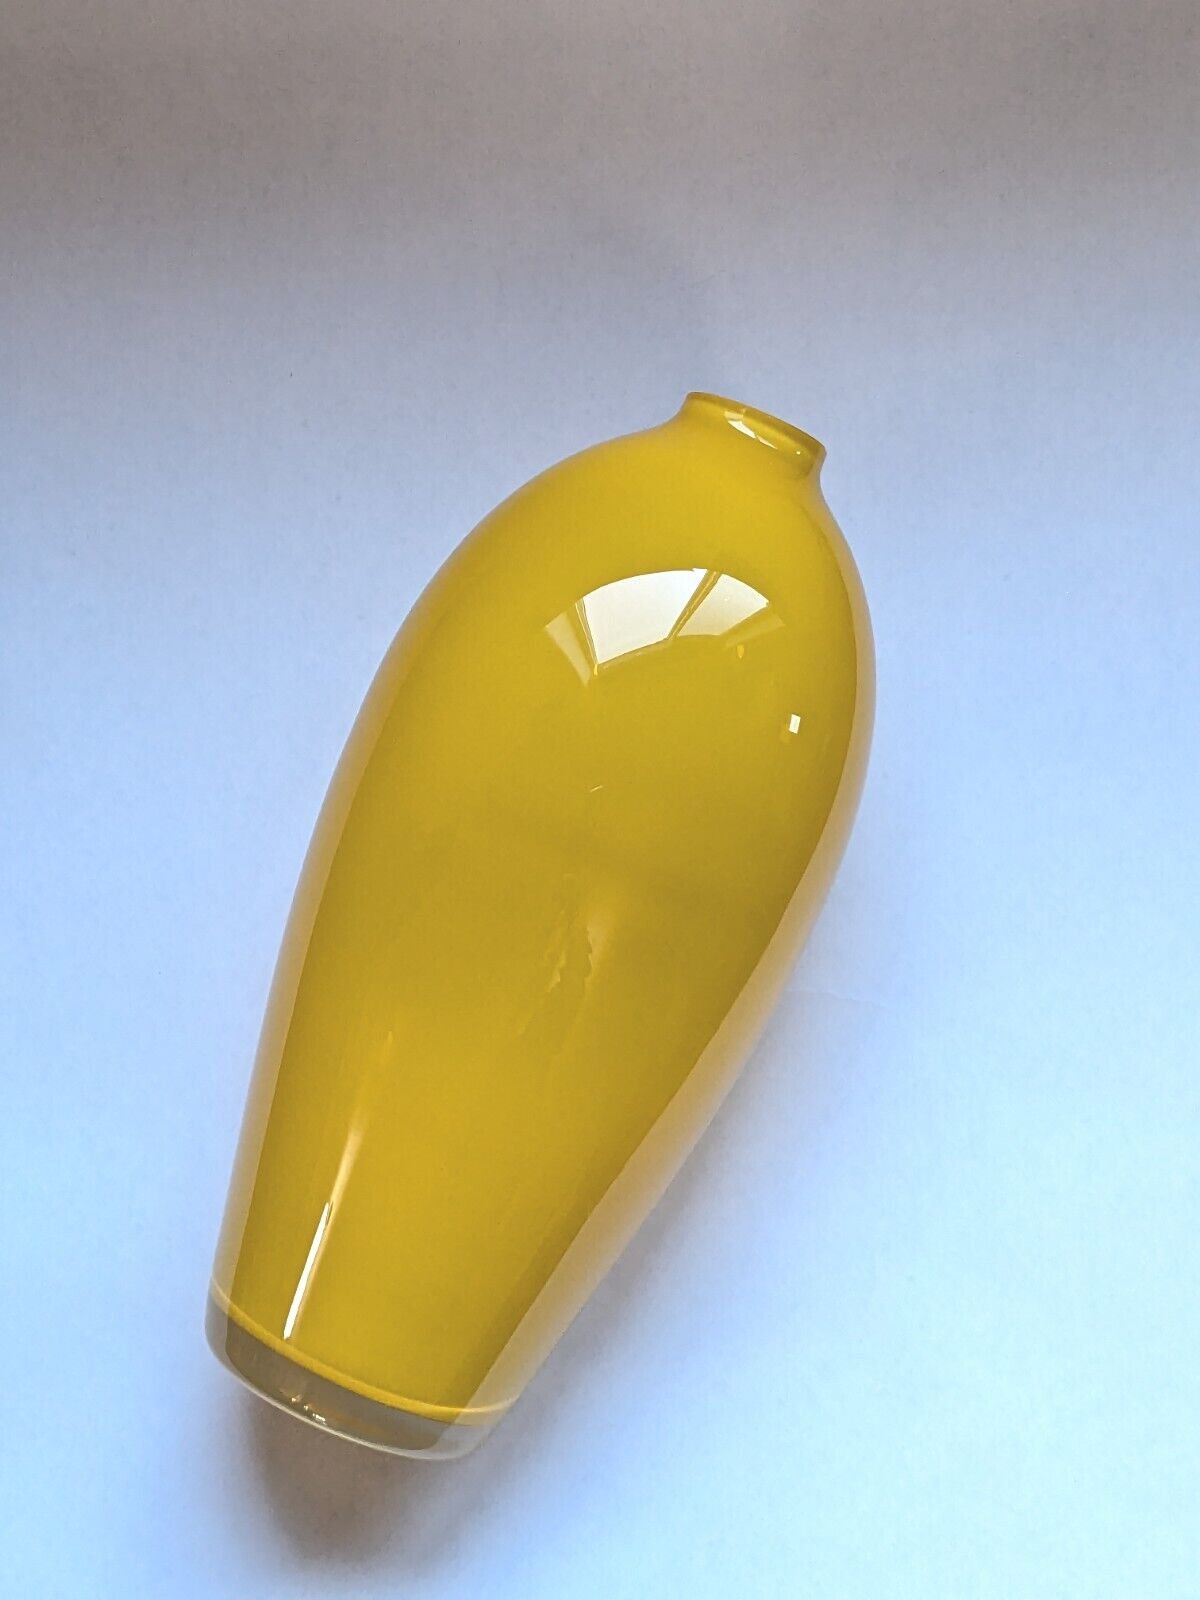 Crate&Barrel Candy Yellow Beautiful Vase Bright Varied Opaqueness Made In France